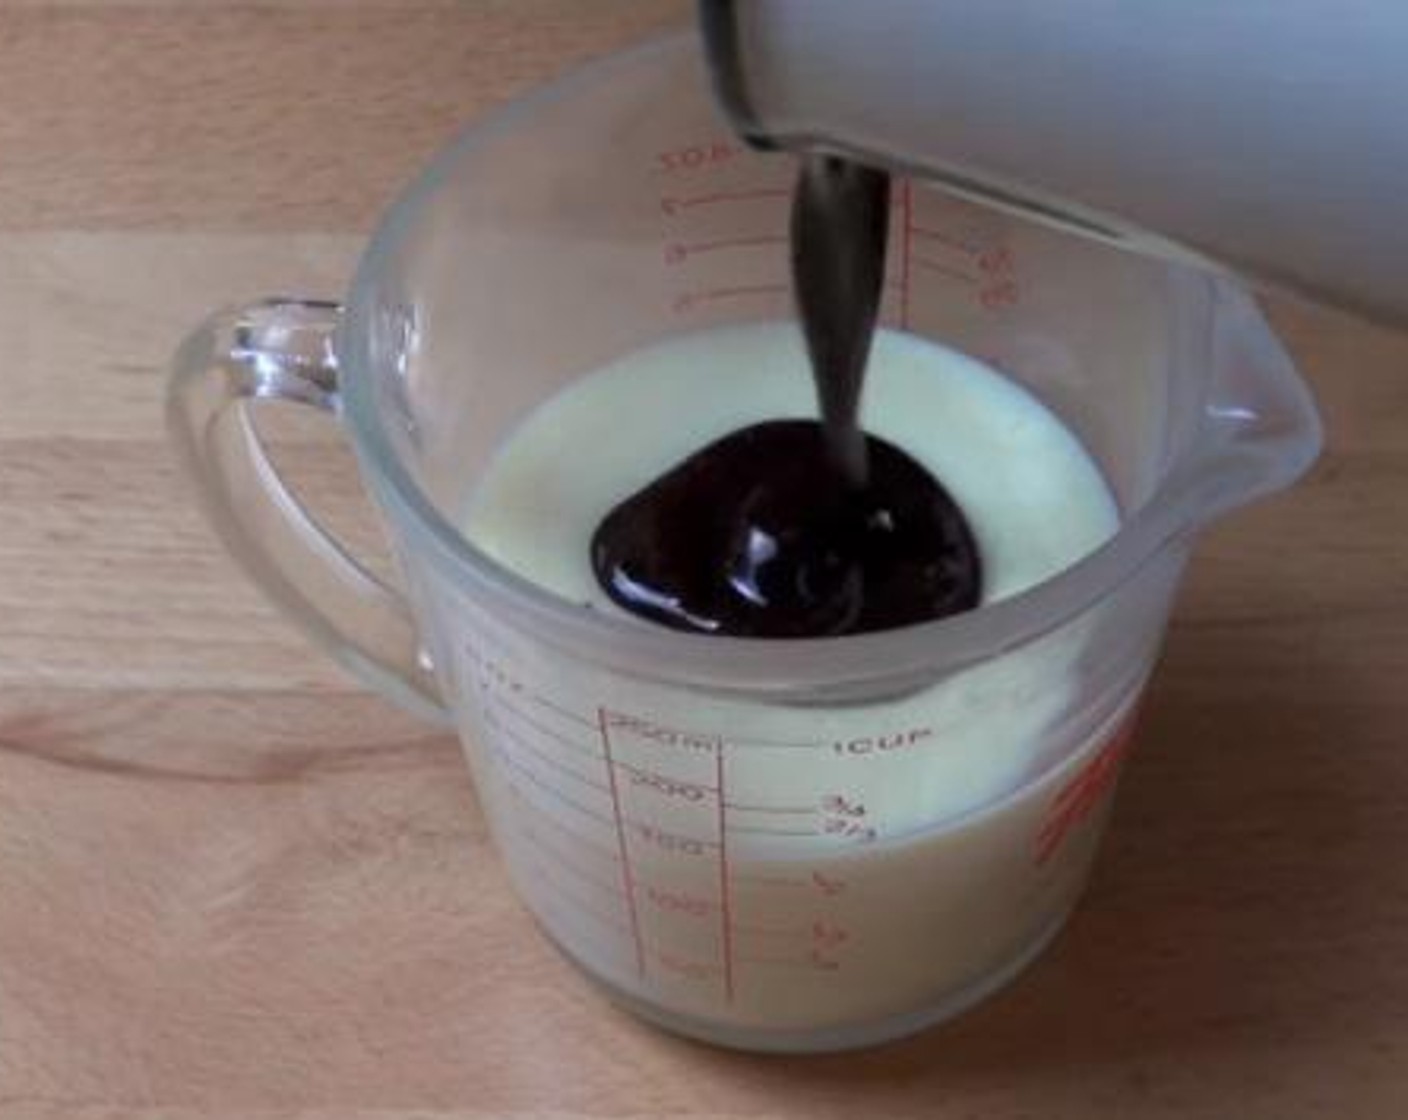 step 2 Then, into a separate mug, add and mix together the Sweetened Condensed Milk (2/3 cup), and coffee mixture.